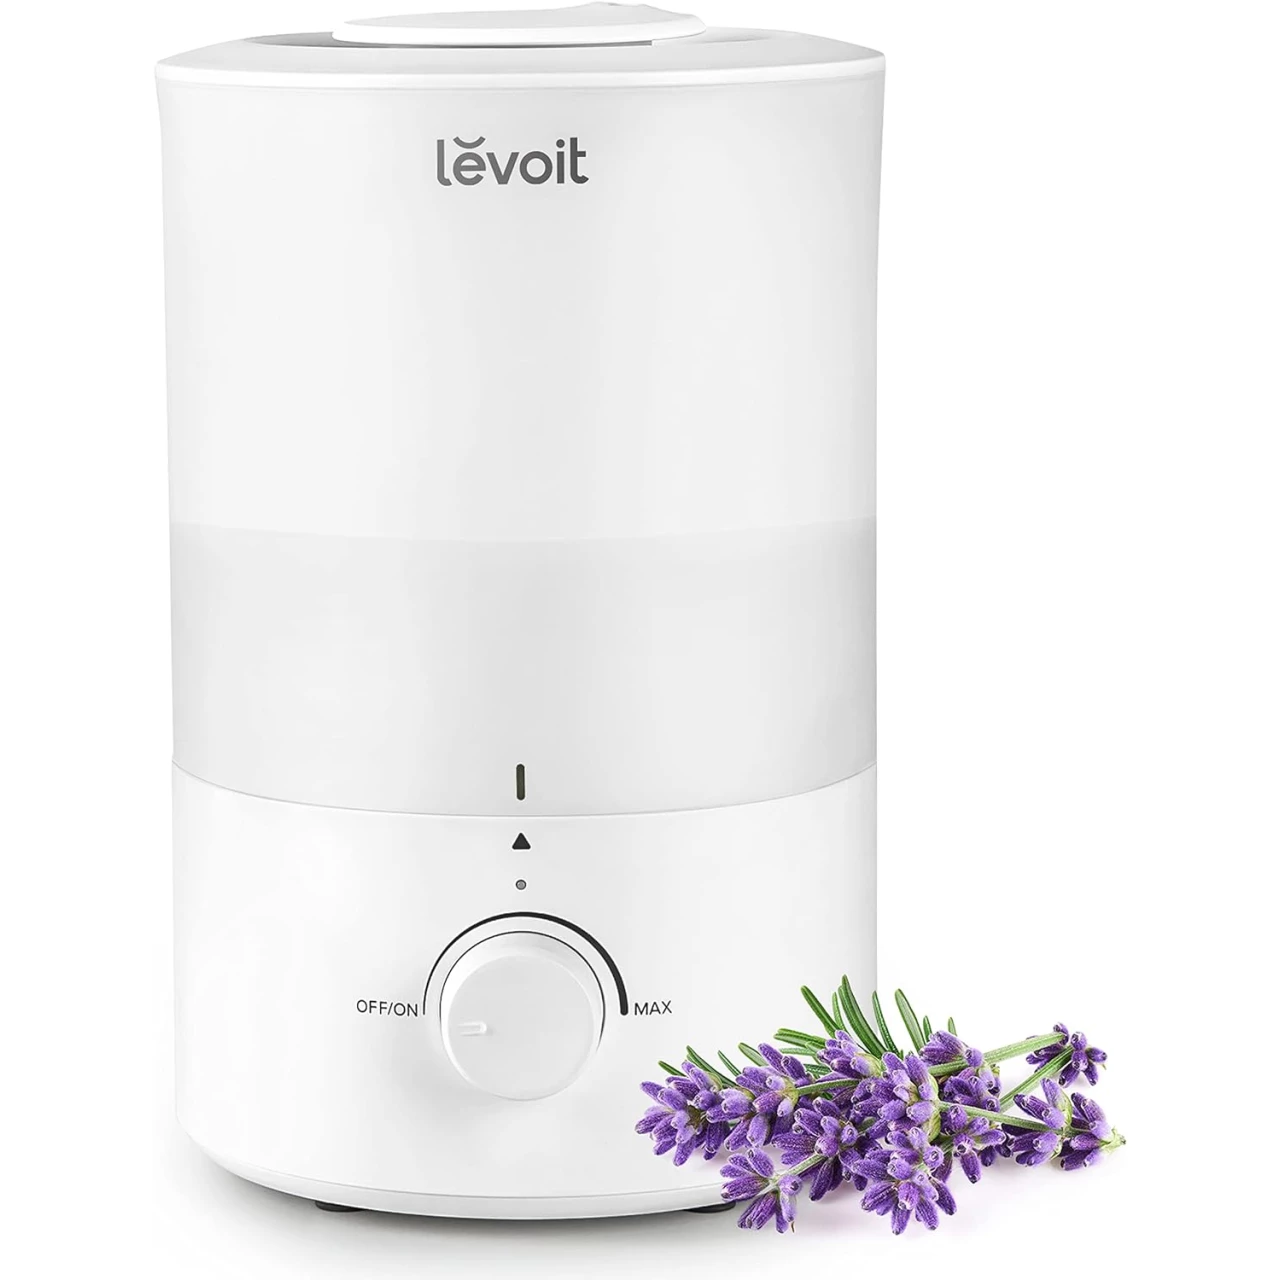 LEVOIT Humidifiers for Bedroom, Quiet (3L Water Tank) Cool Mist Top Fill Essential Oil Diffuser